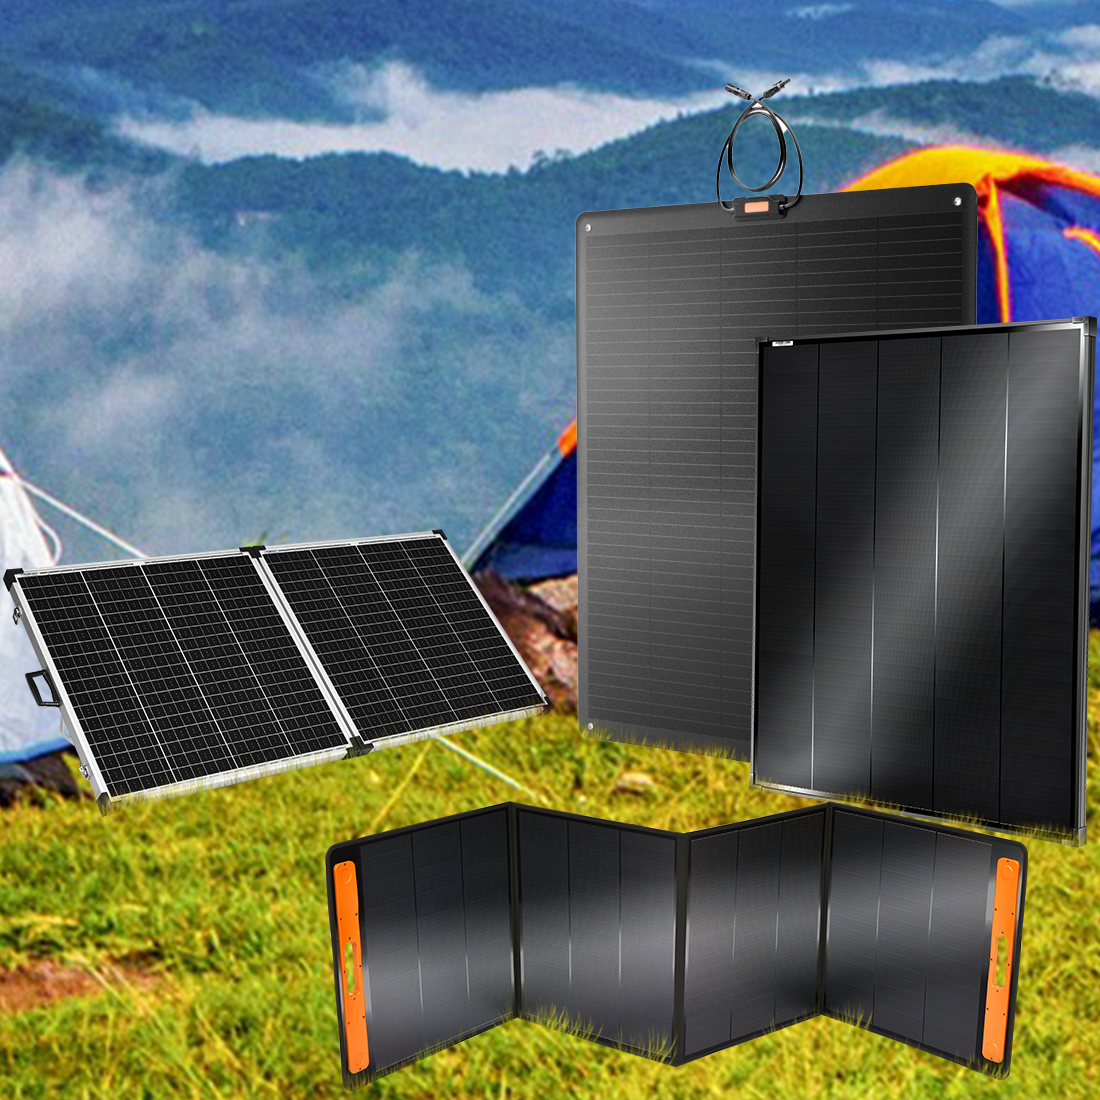 Which Is the Best Solar Panel?